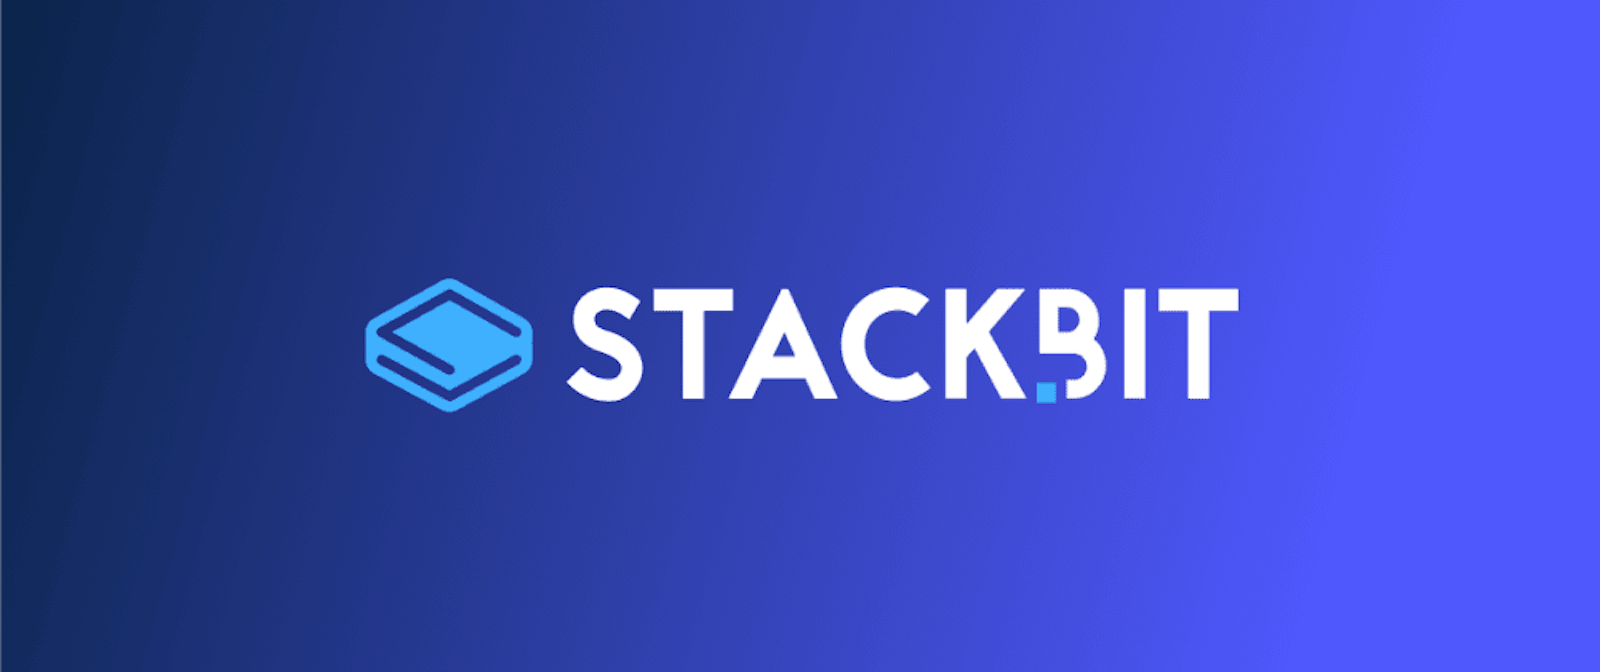 Stackbit, the Game Changer